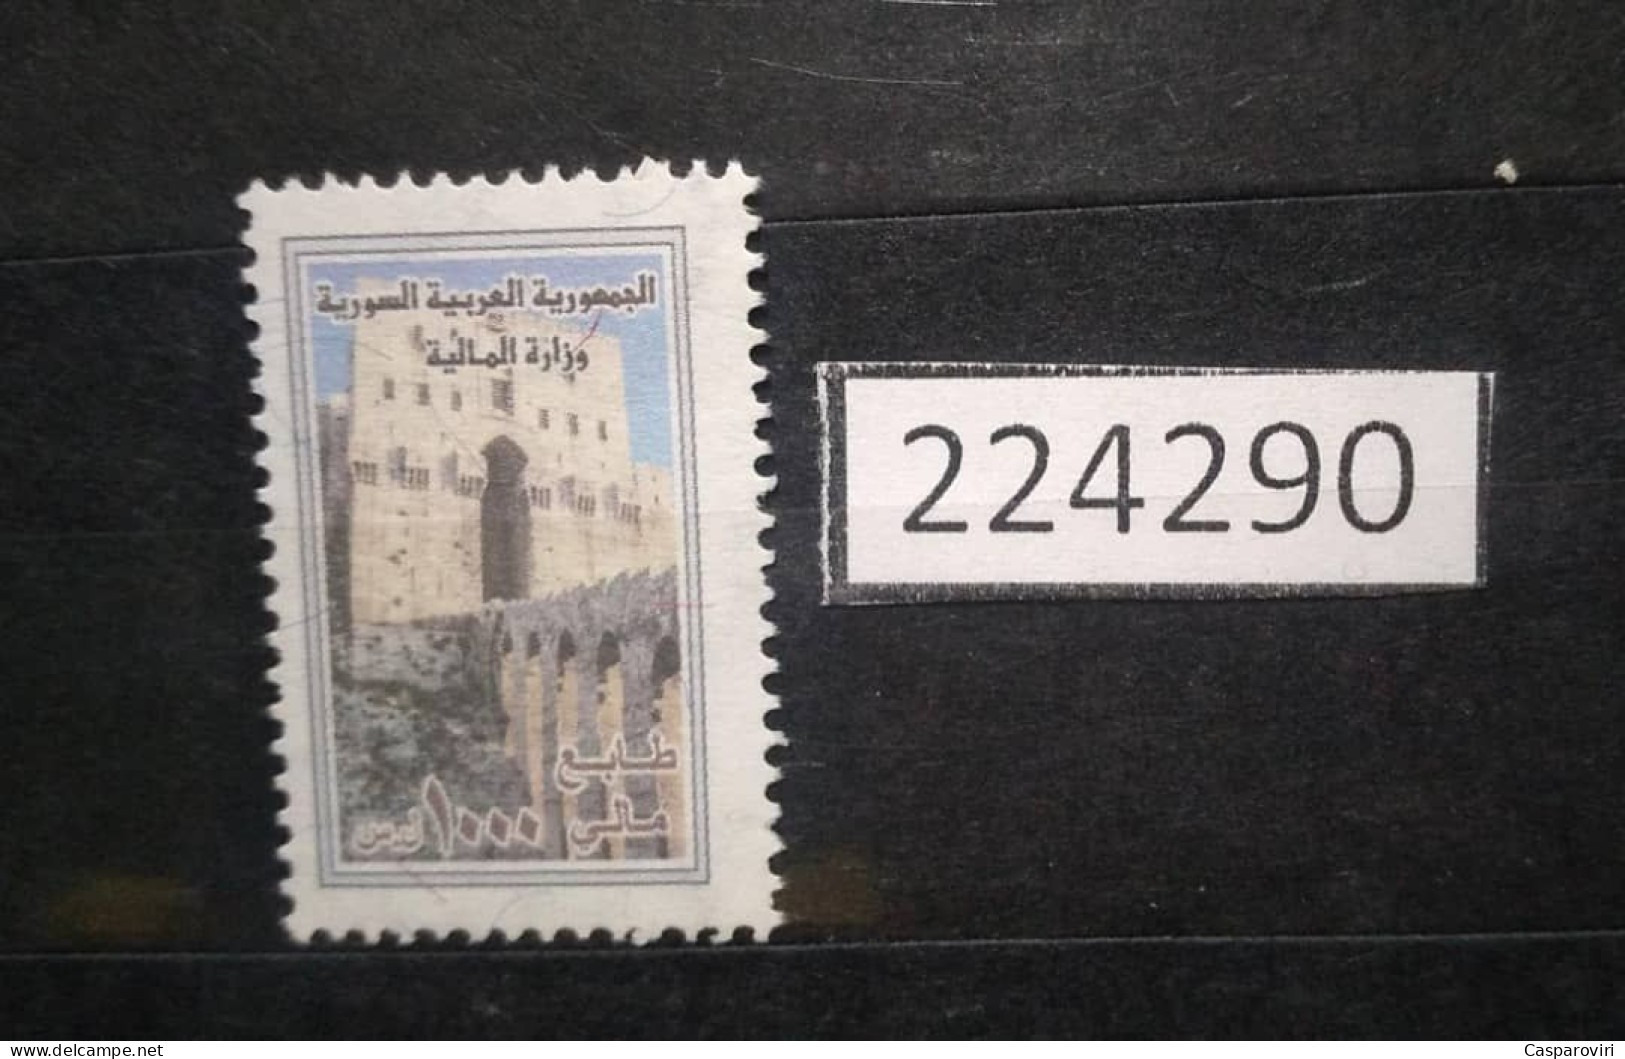 224290; Syria; Revenue Stamp; 1000 Pounds; General Fiscal Stamps; Granite Paper With WM; Fiscal; MNH - Syria